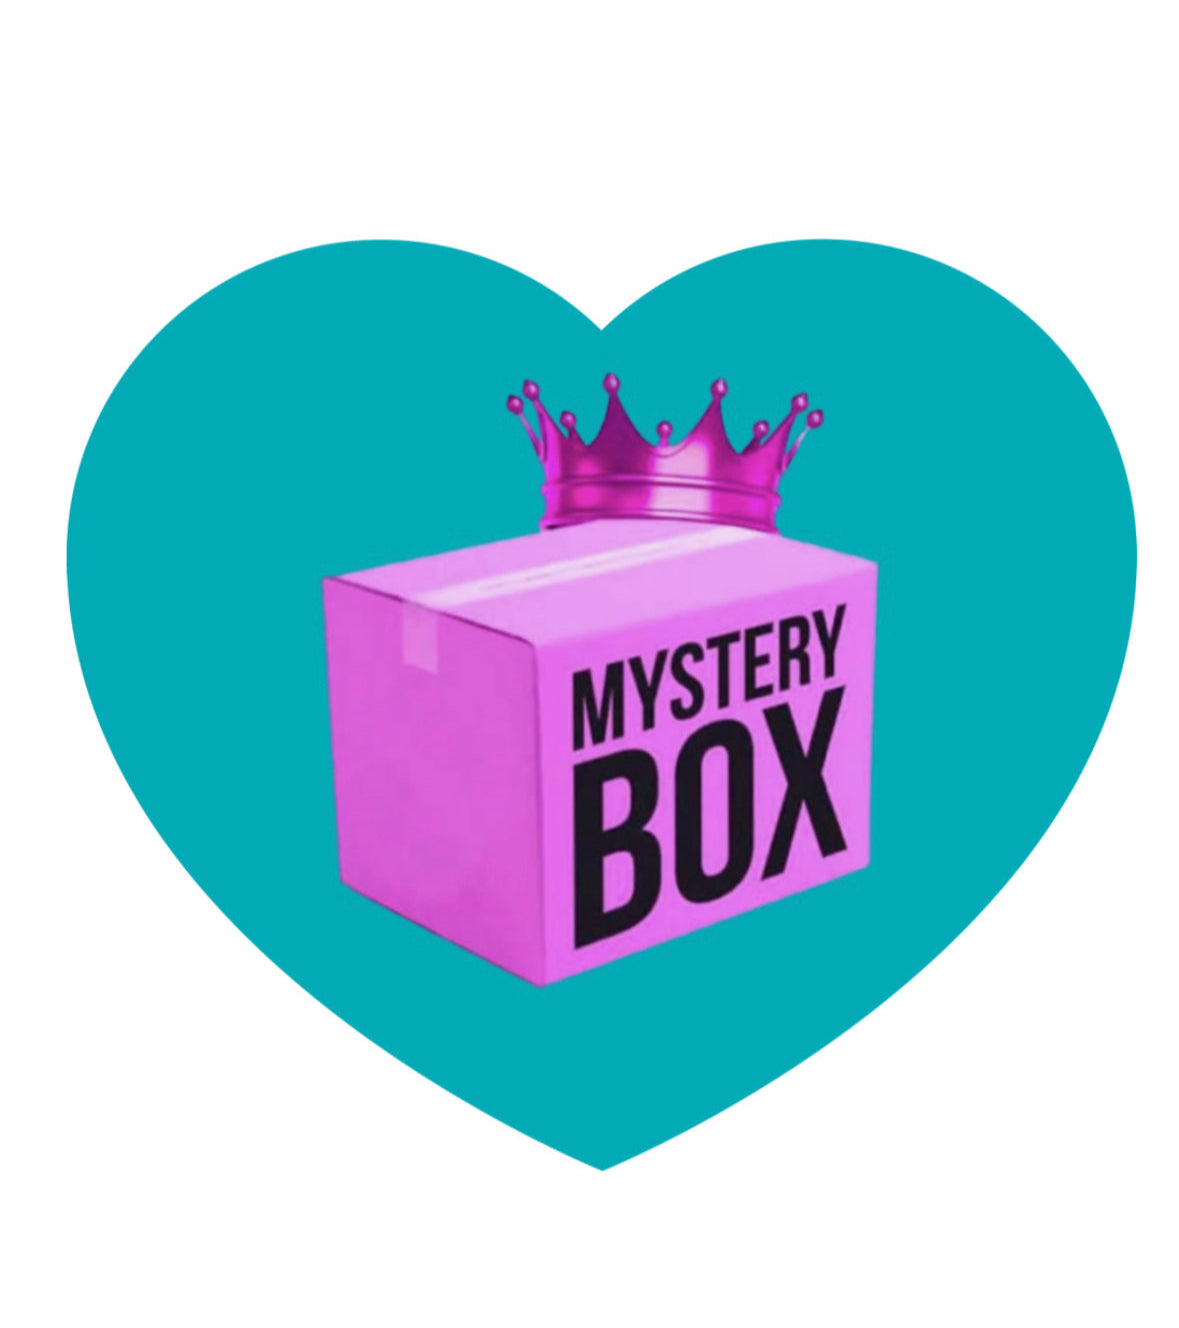 May Mystery Box - PLEASE DO NOT ADD ANYTHING ELSE TO YOUR CART WITH THIS ORDER OR I WILL HAVE TO CANCEL YOUR ORDER - Thank you so much 🩷